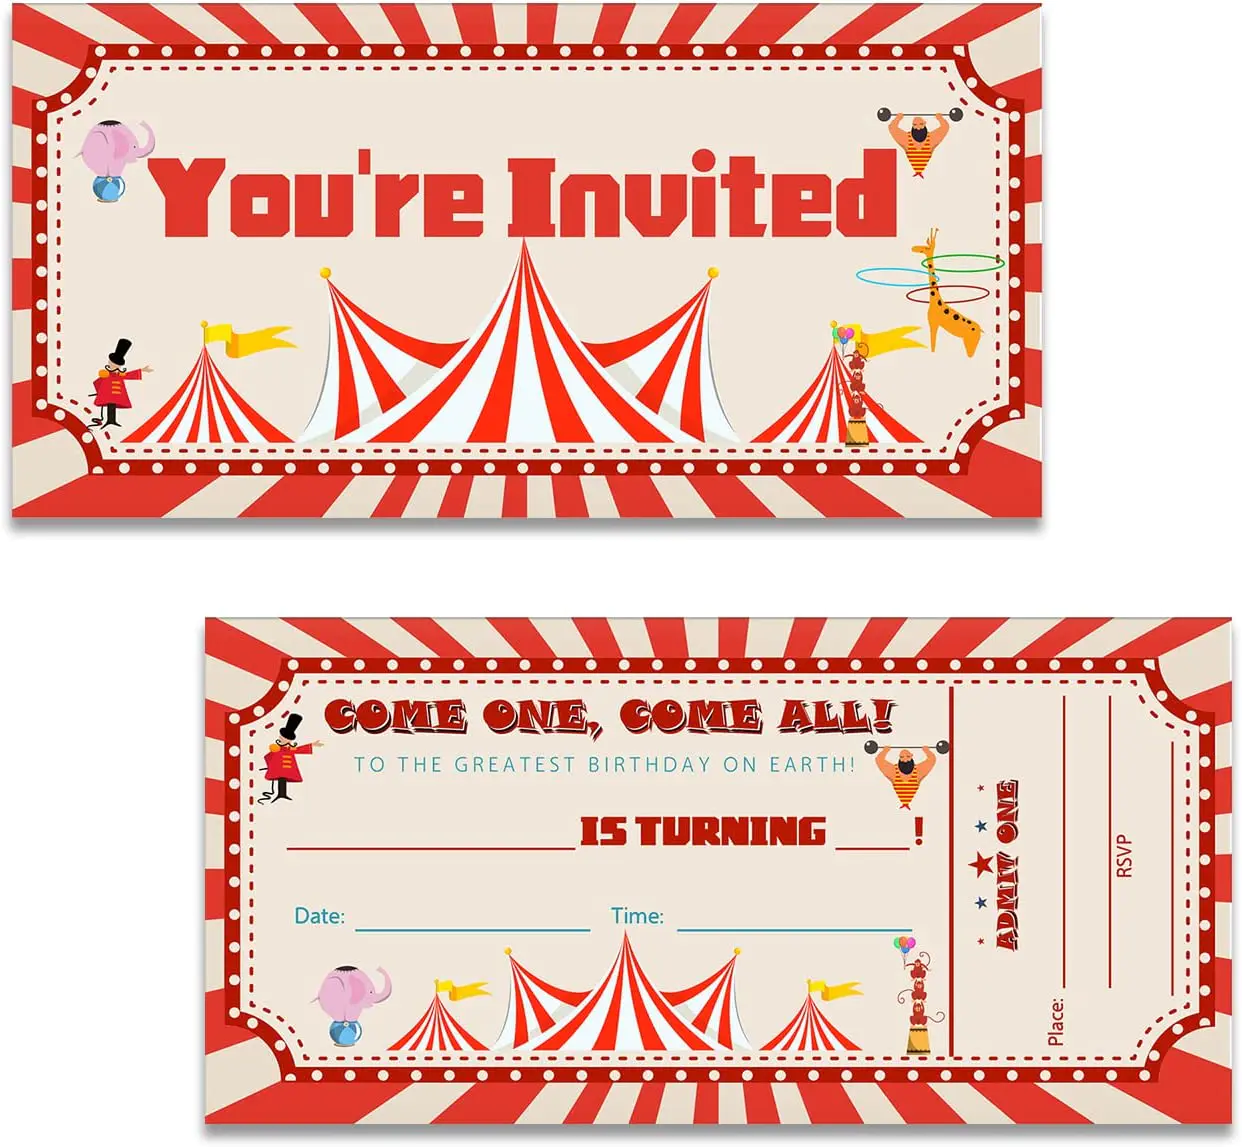 Design Free Fanfold Circus Ticket Template with Printing Single or Double Sides Tickets